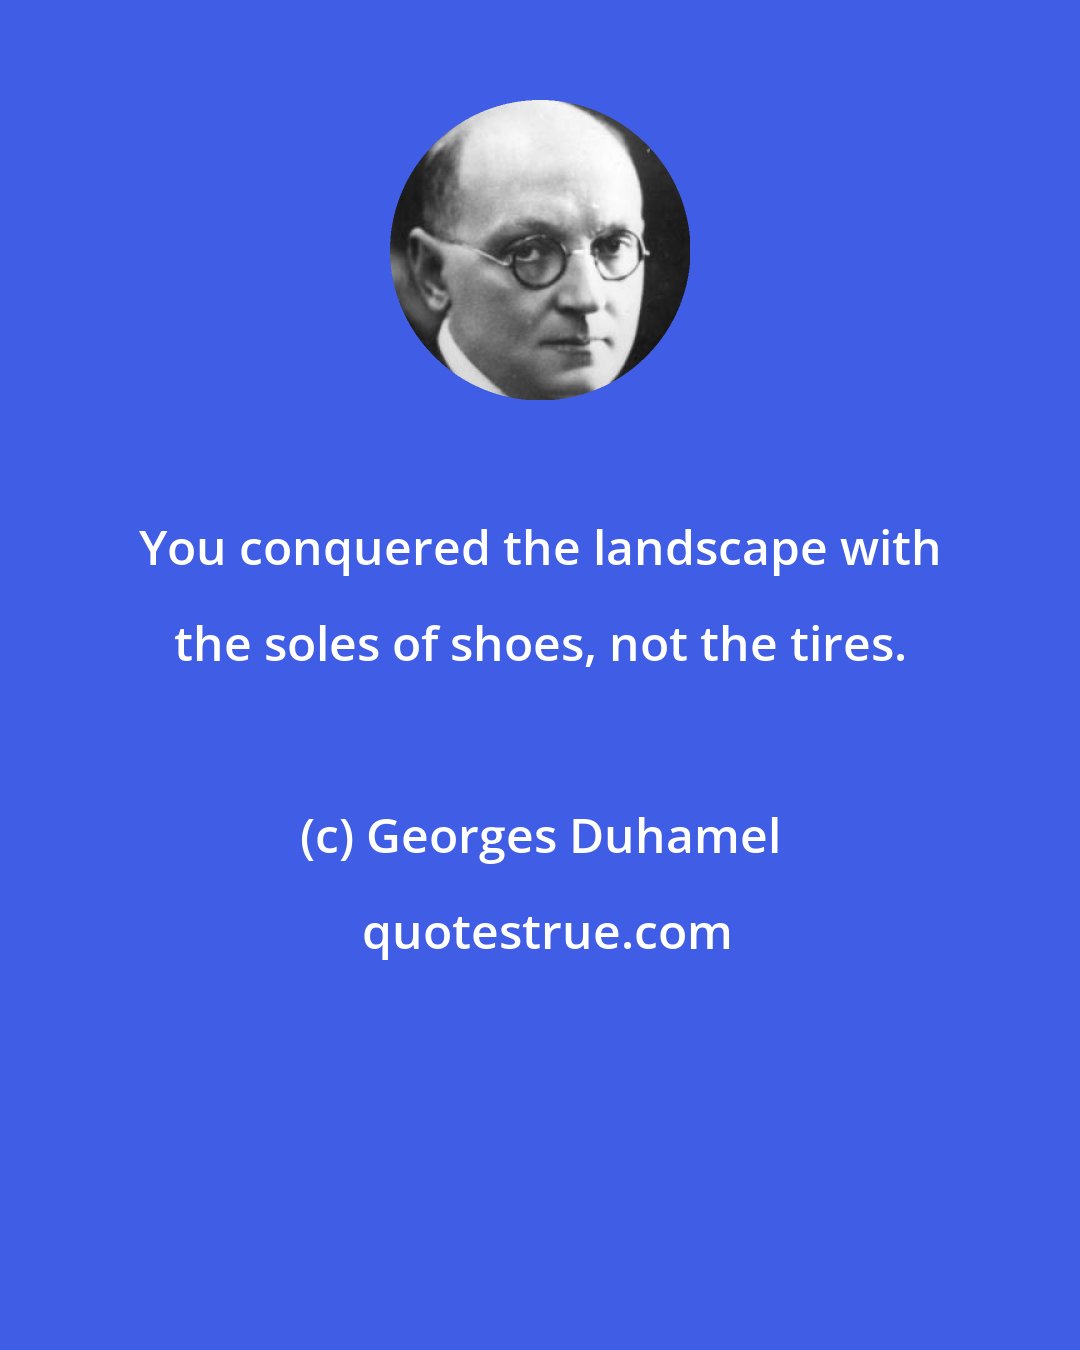 Georges Duhamel: You conquered the landscape with the soles of shoes, not the tires.